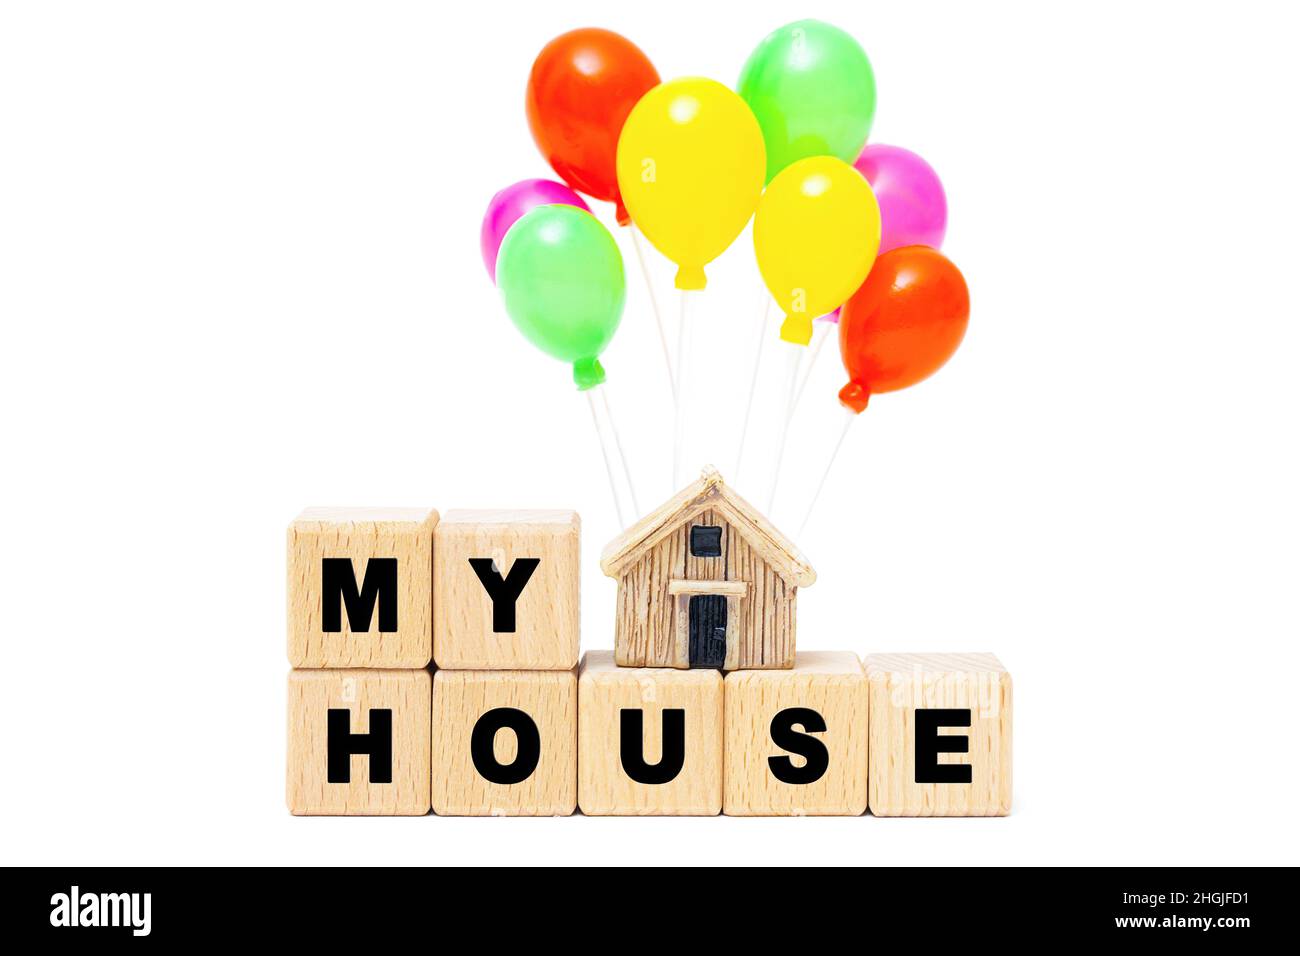 Text MY HOUSE made of wooden letter blocks and a miniature house model with toy balloons isolated on white background. Creative housewarming party con Stock Photo